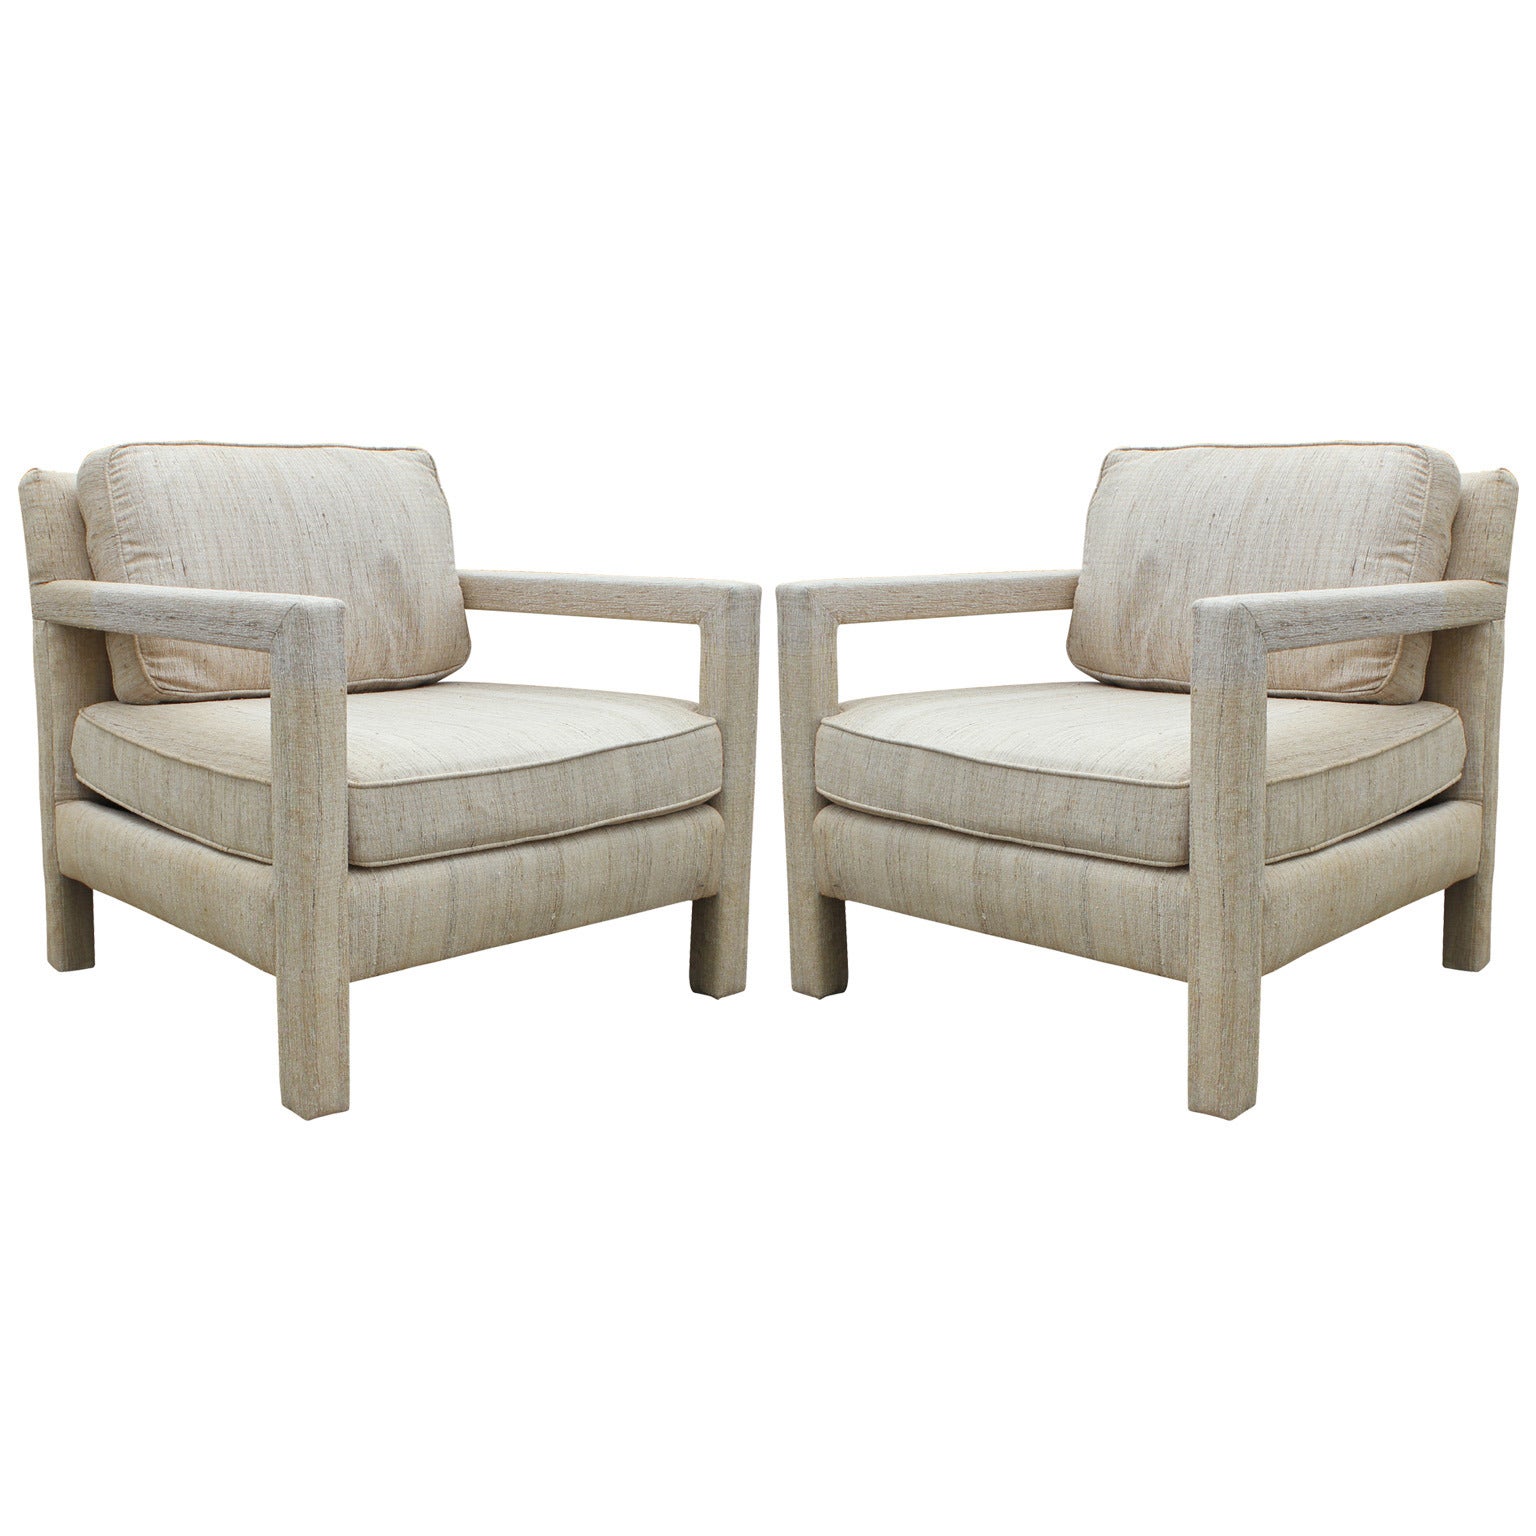 Milo Baughman Parson Style Upholstered Lounge Chairs